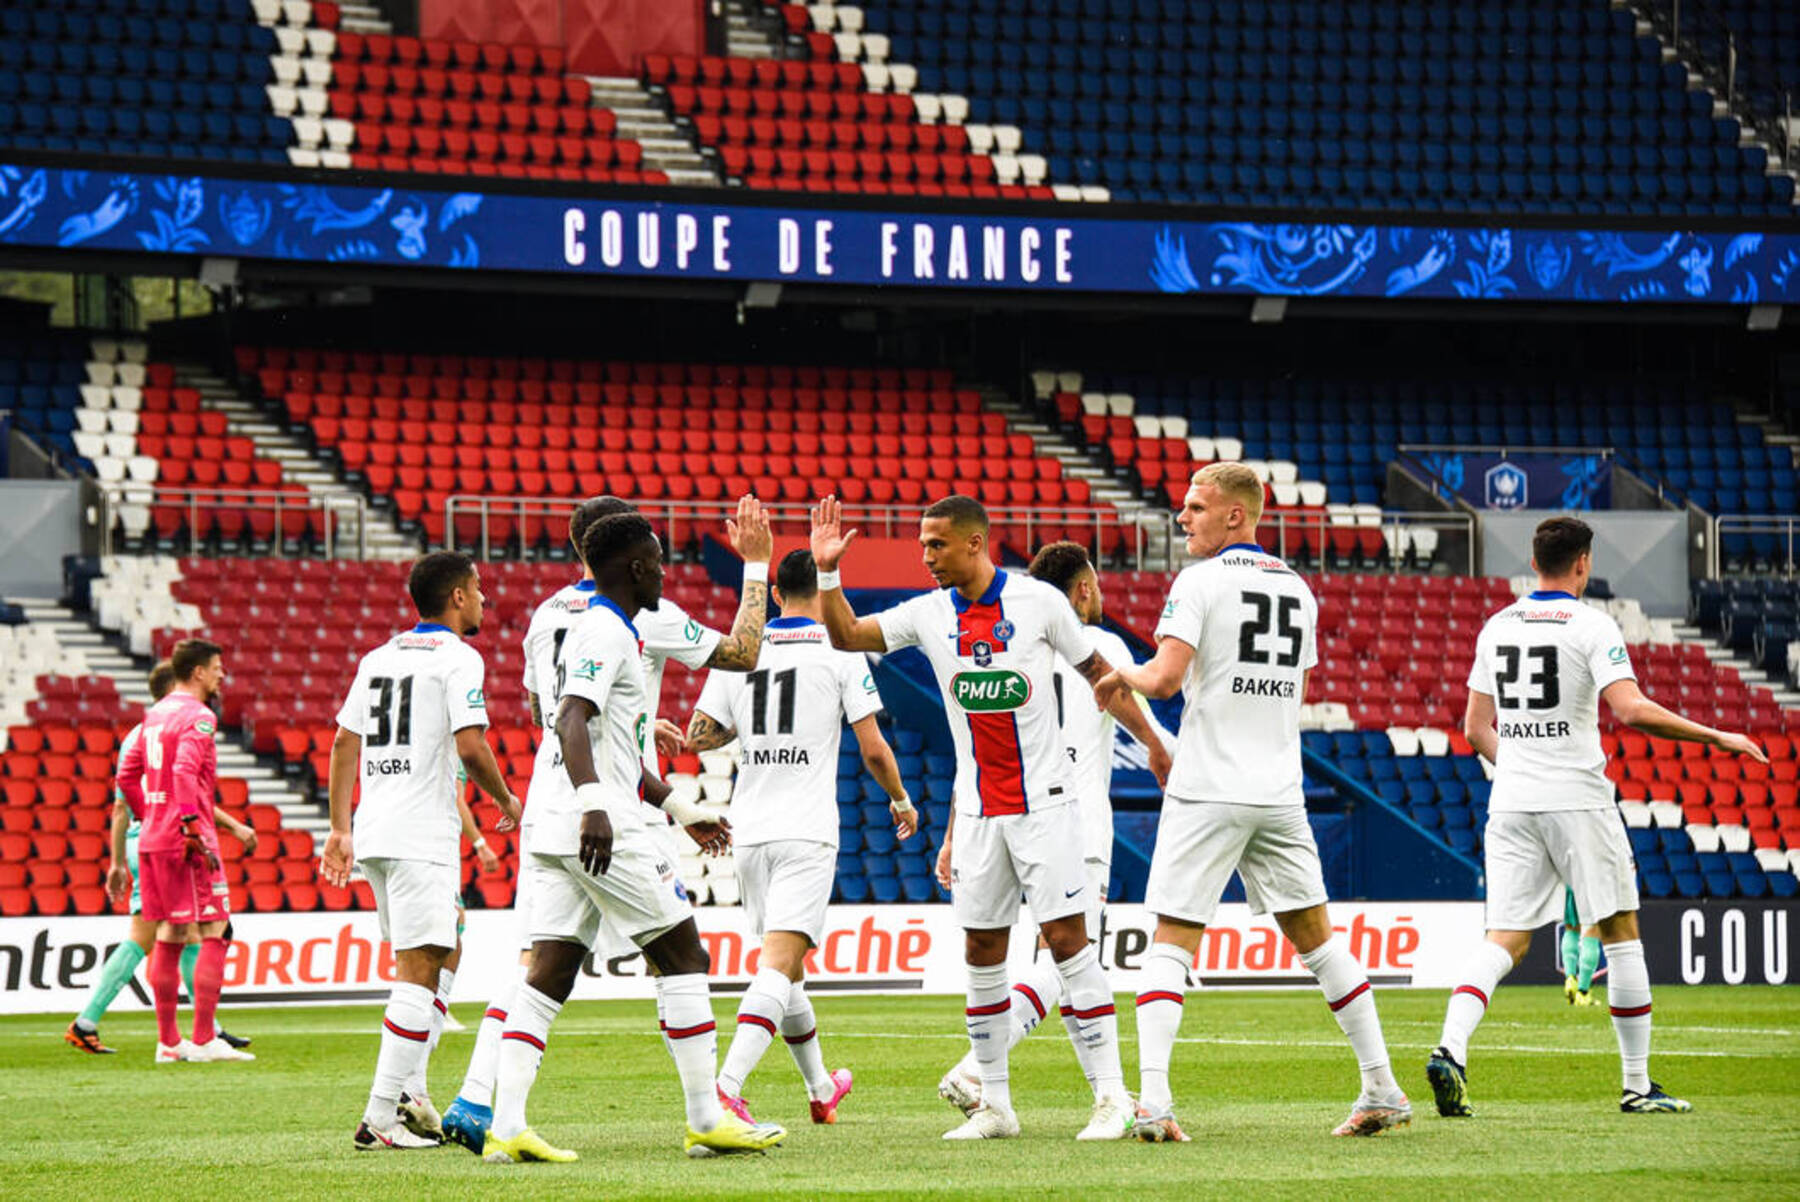 Video Angers Gifts PSG With a Coupe de France Own Goal Following a Key